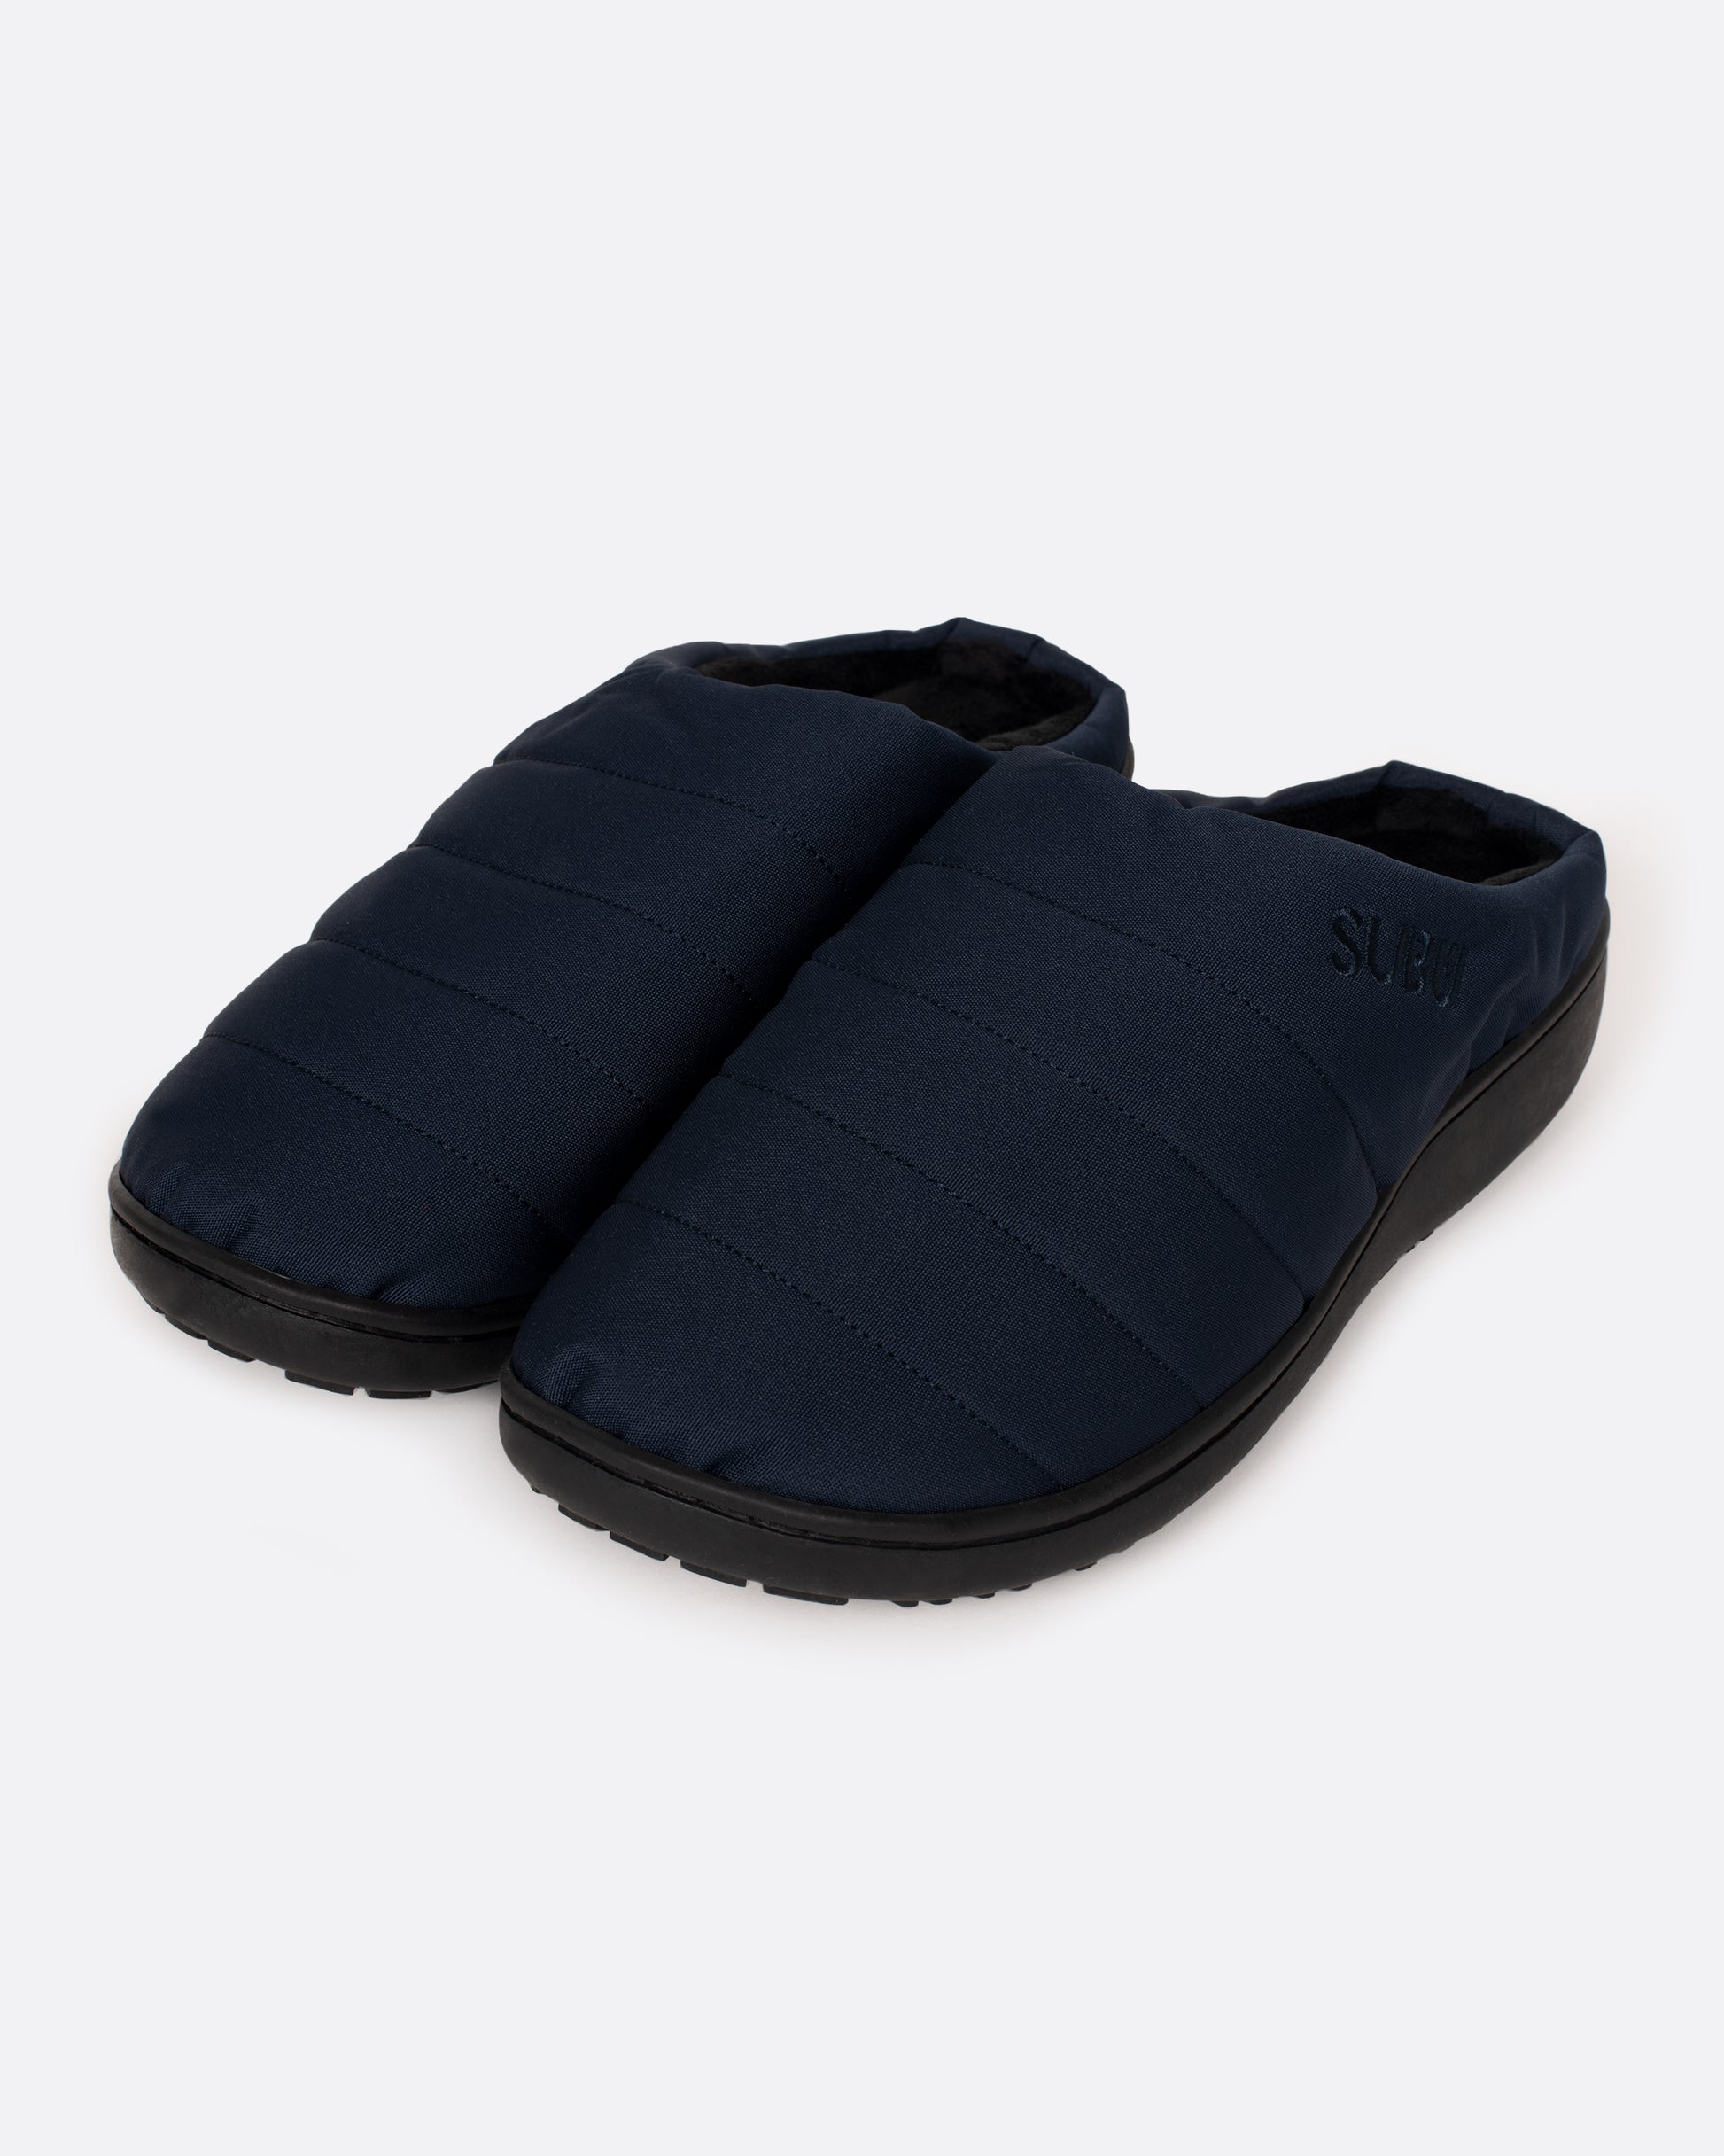 A pair of navy nylon slippers with black rubber soles, shown from the side.